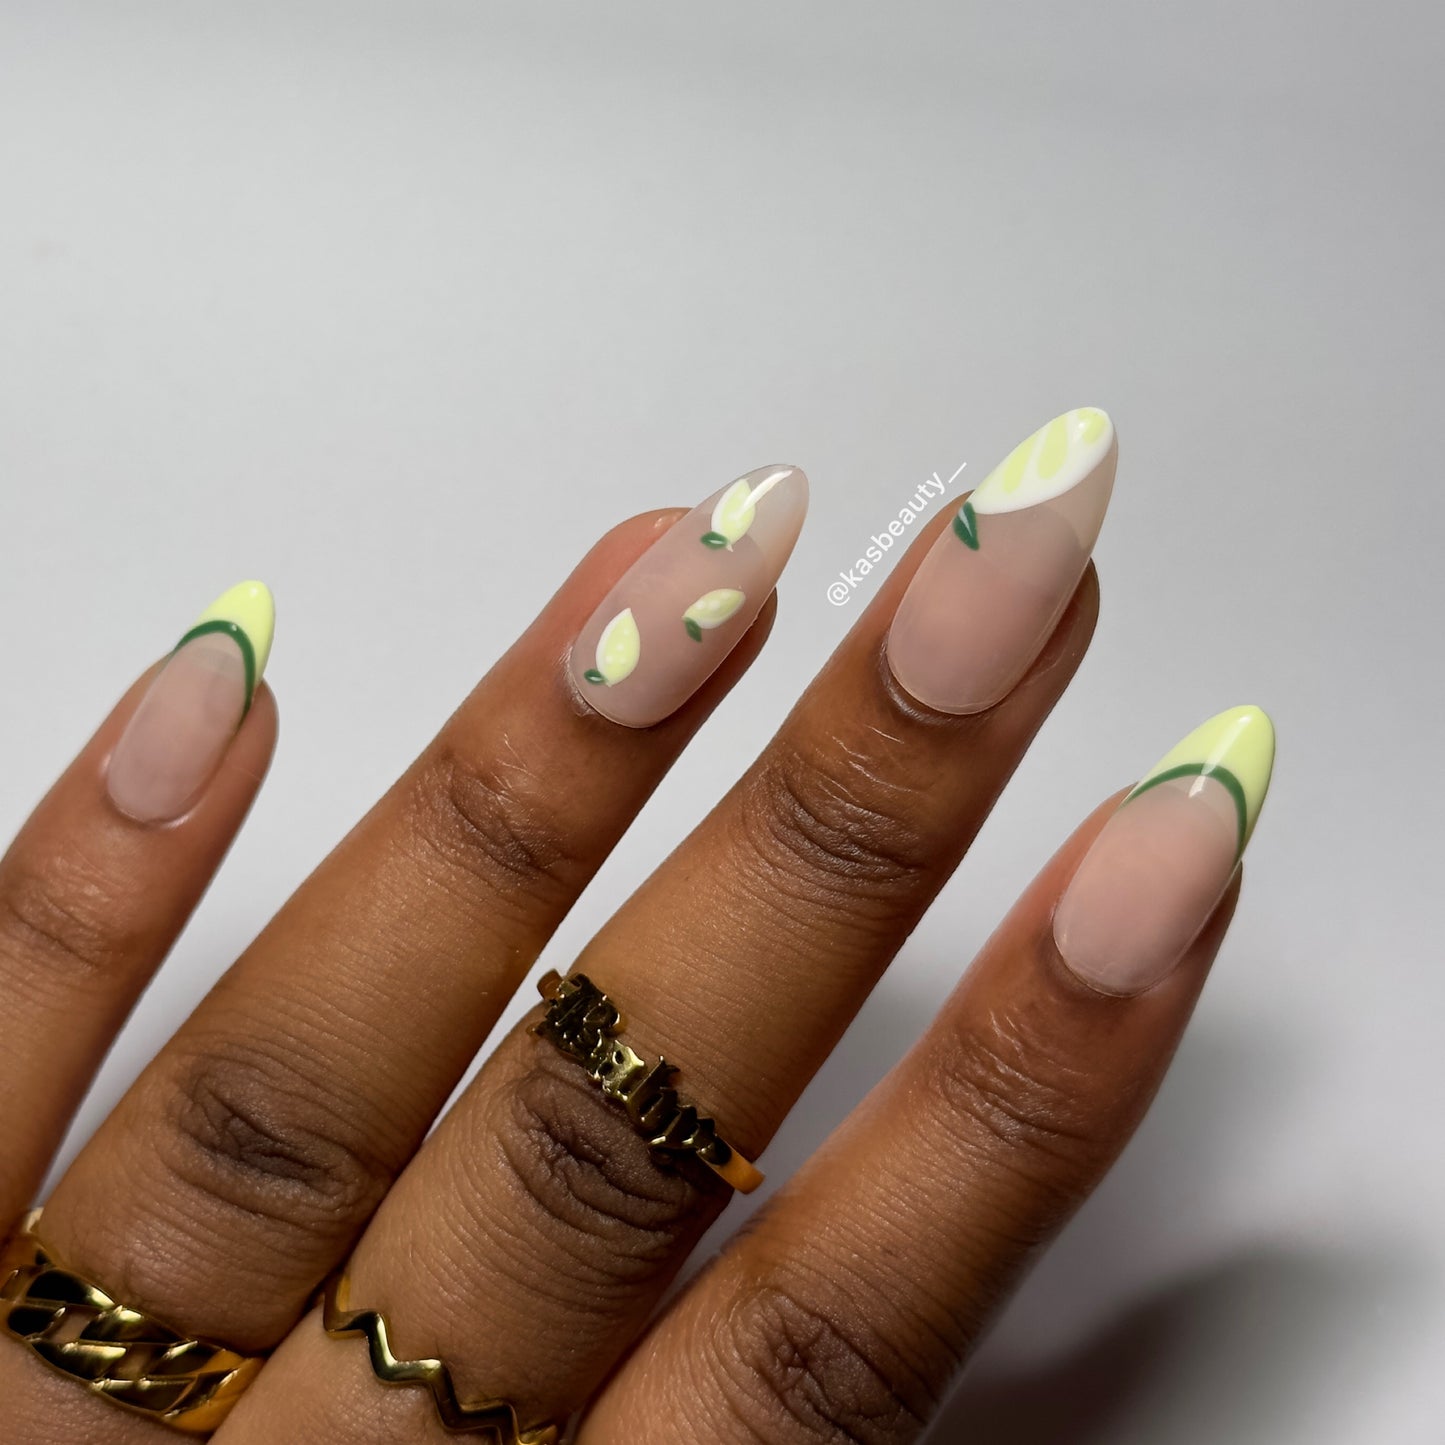 Limelight Press On Nails